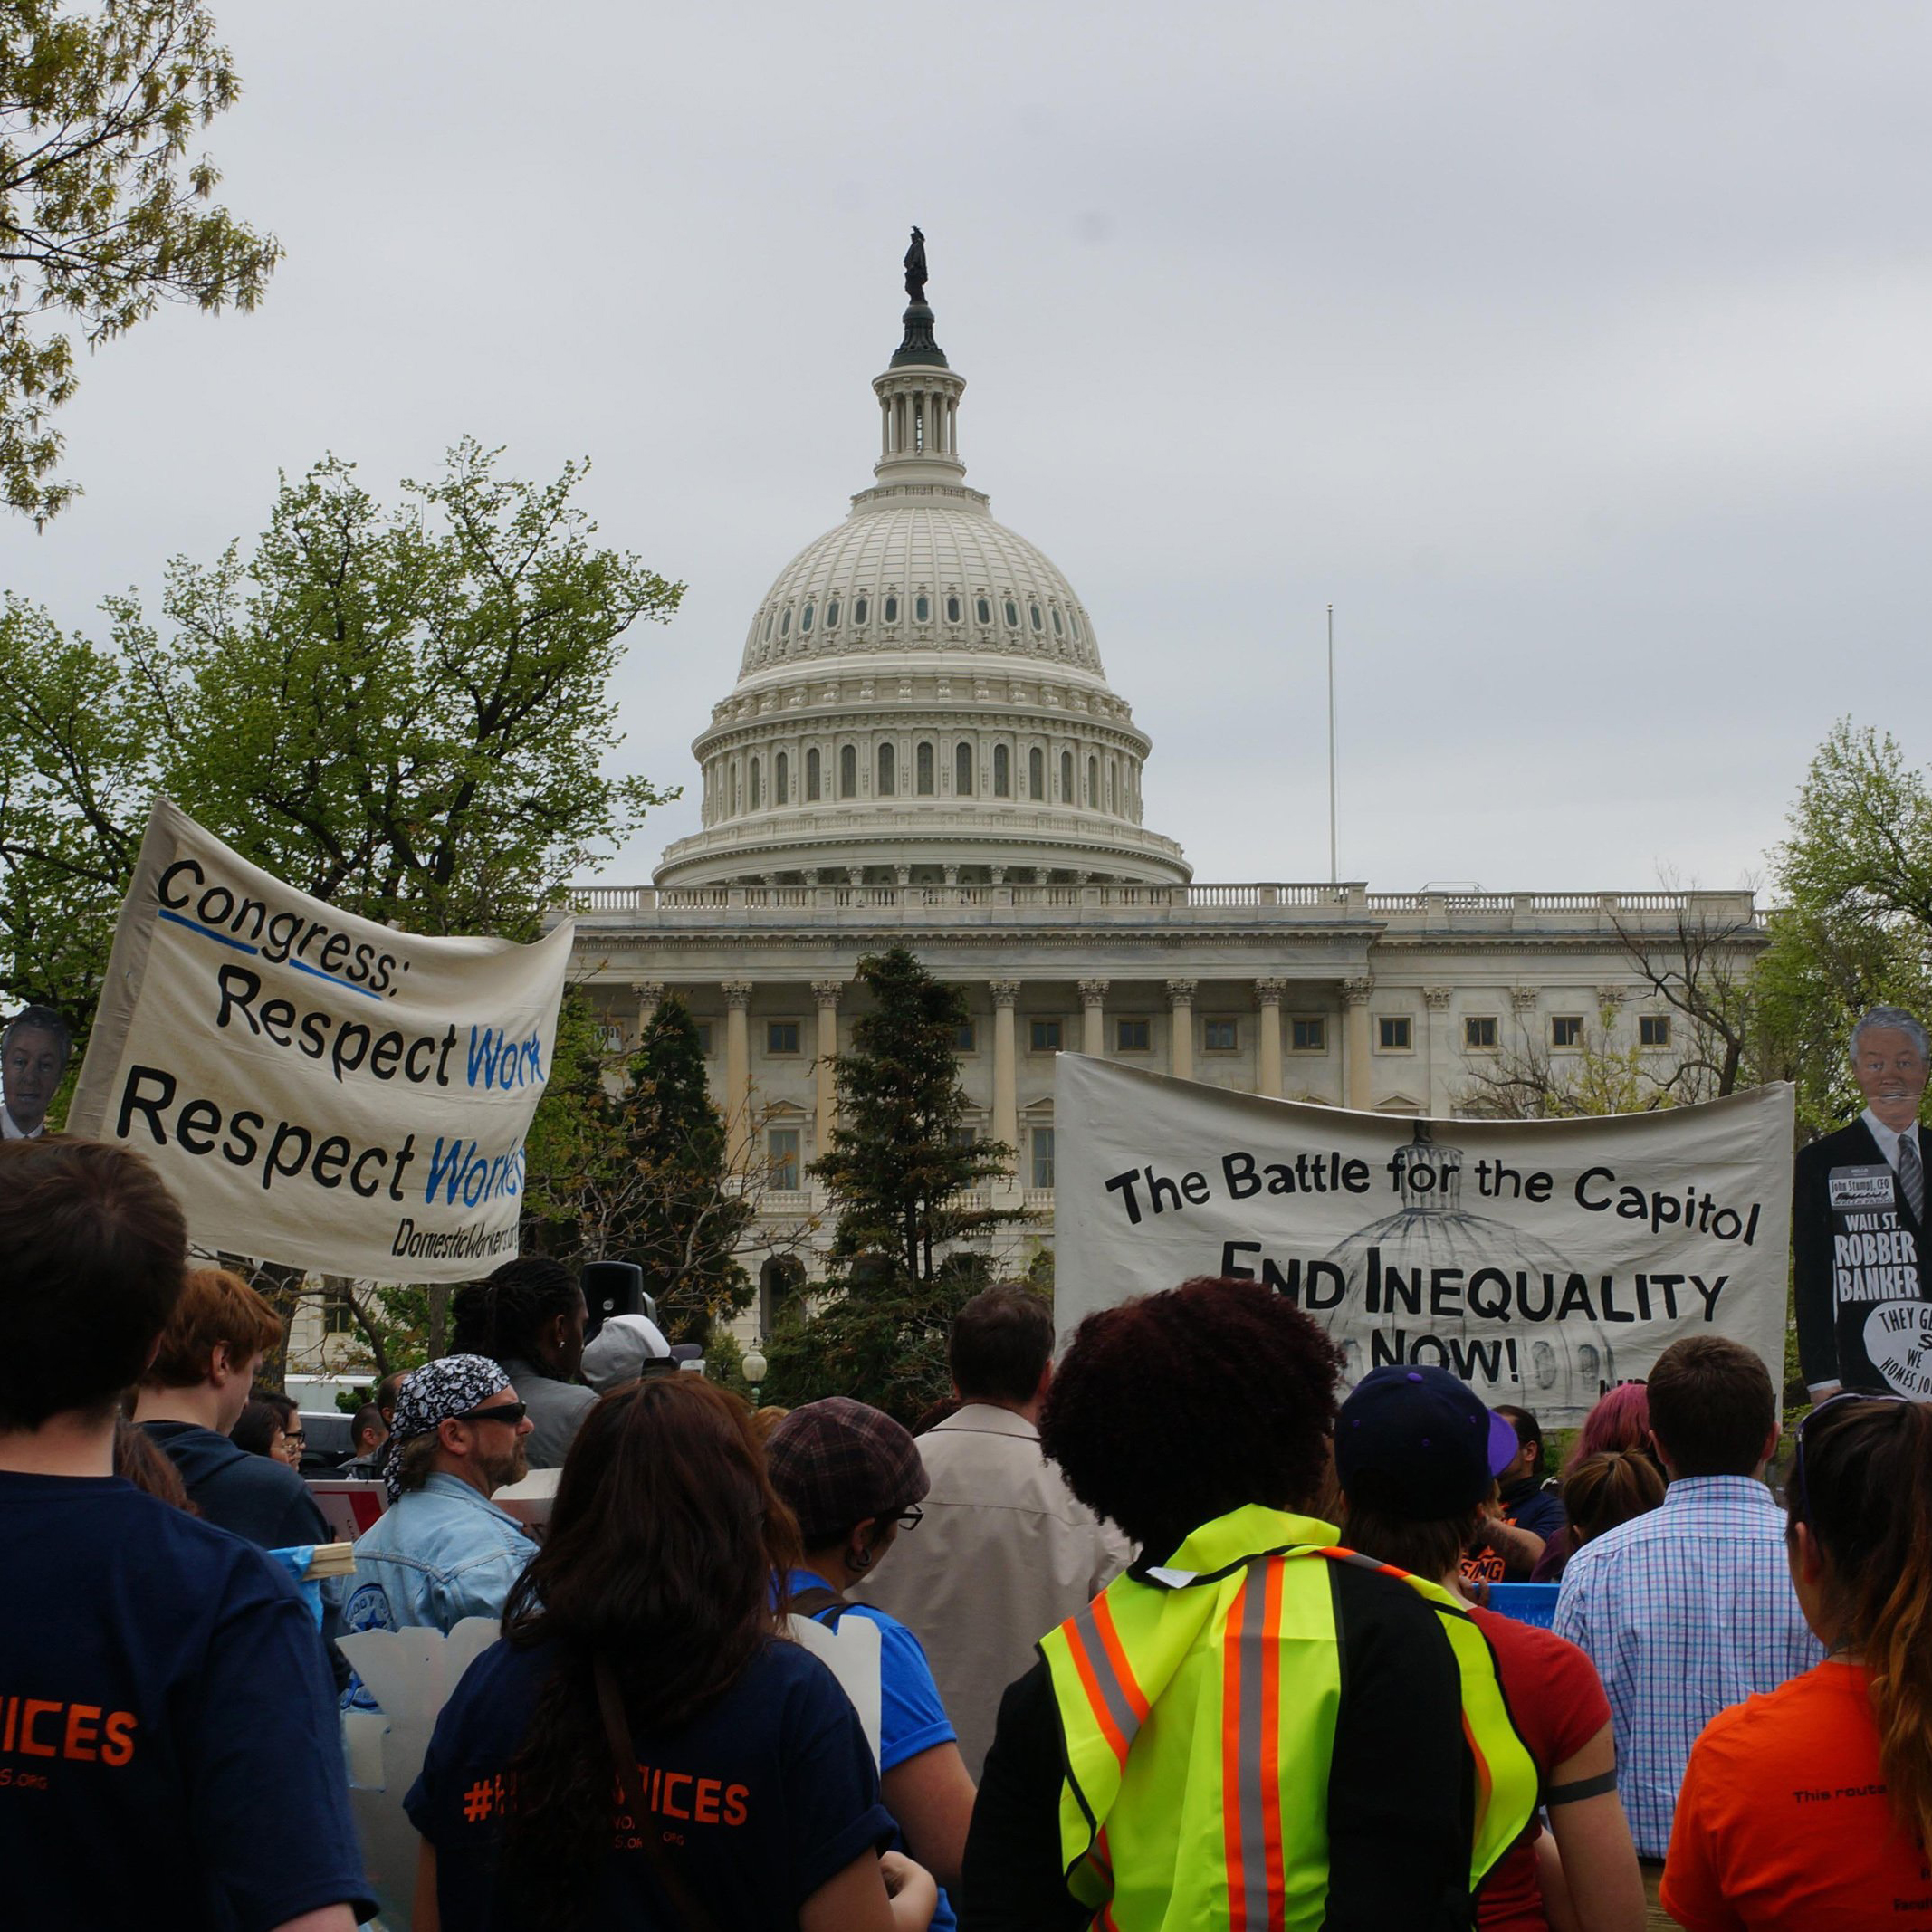 A group of protesters stand outside of the U.S. Capitol buidling on a cloudy day. A sign on the left reads, "Congress: Respect Work Respect Work." A sign on the right reads, "The Battle for the Capitol. End Inequality Now!"